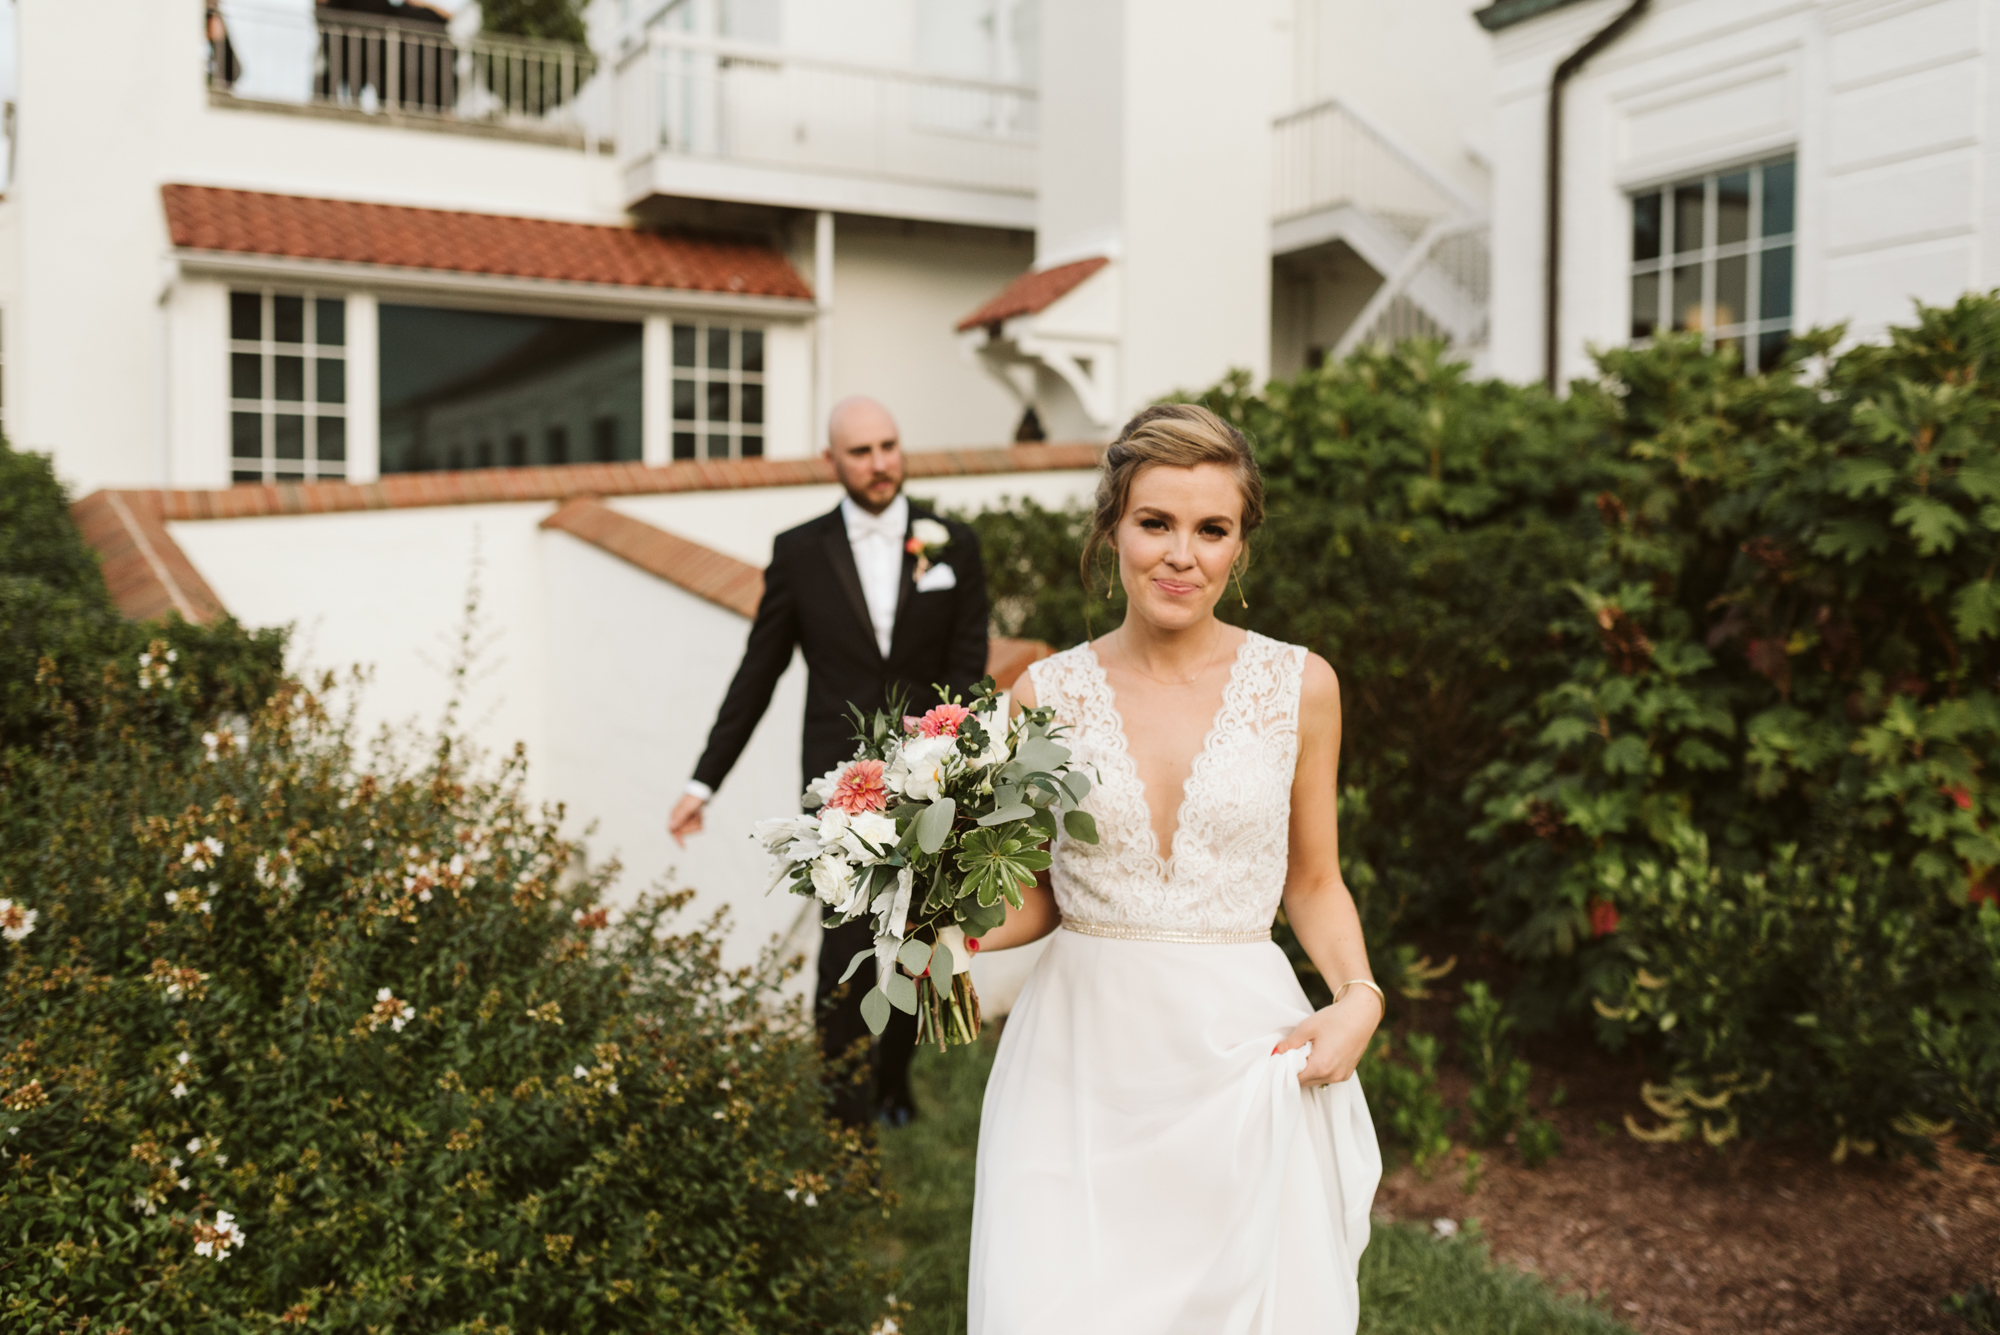 Elegant, Columbia Country Club, Chevy Chase Maryland, Baltimore Wedding Photographer, Classic, Traditional, Bride Walking with Groom in Background, BHLDN Wedding Dress